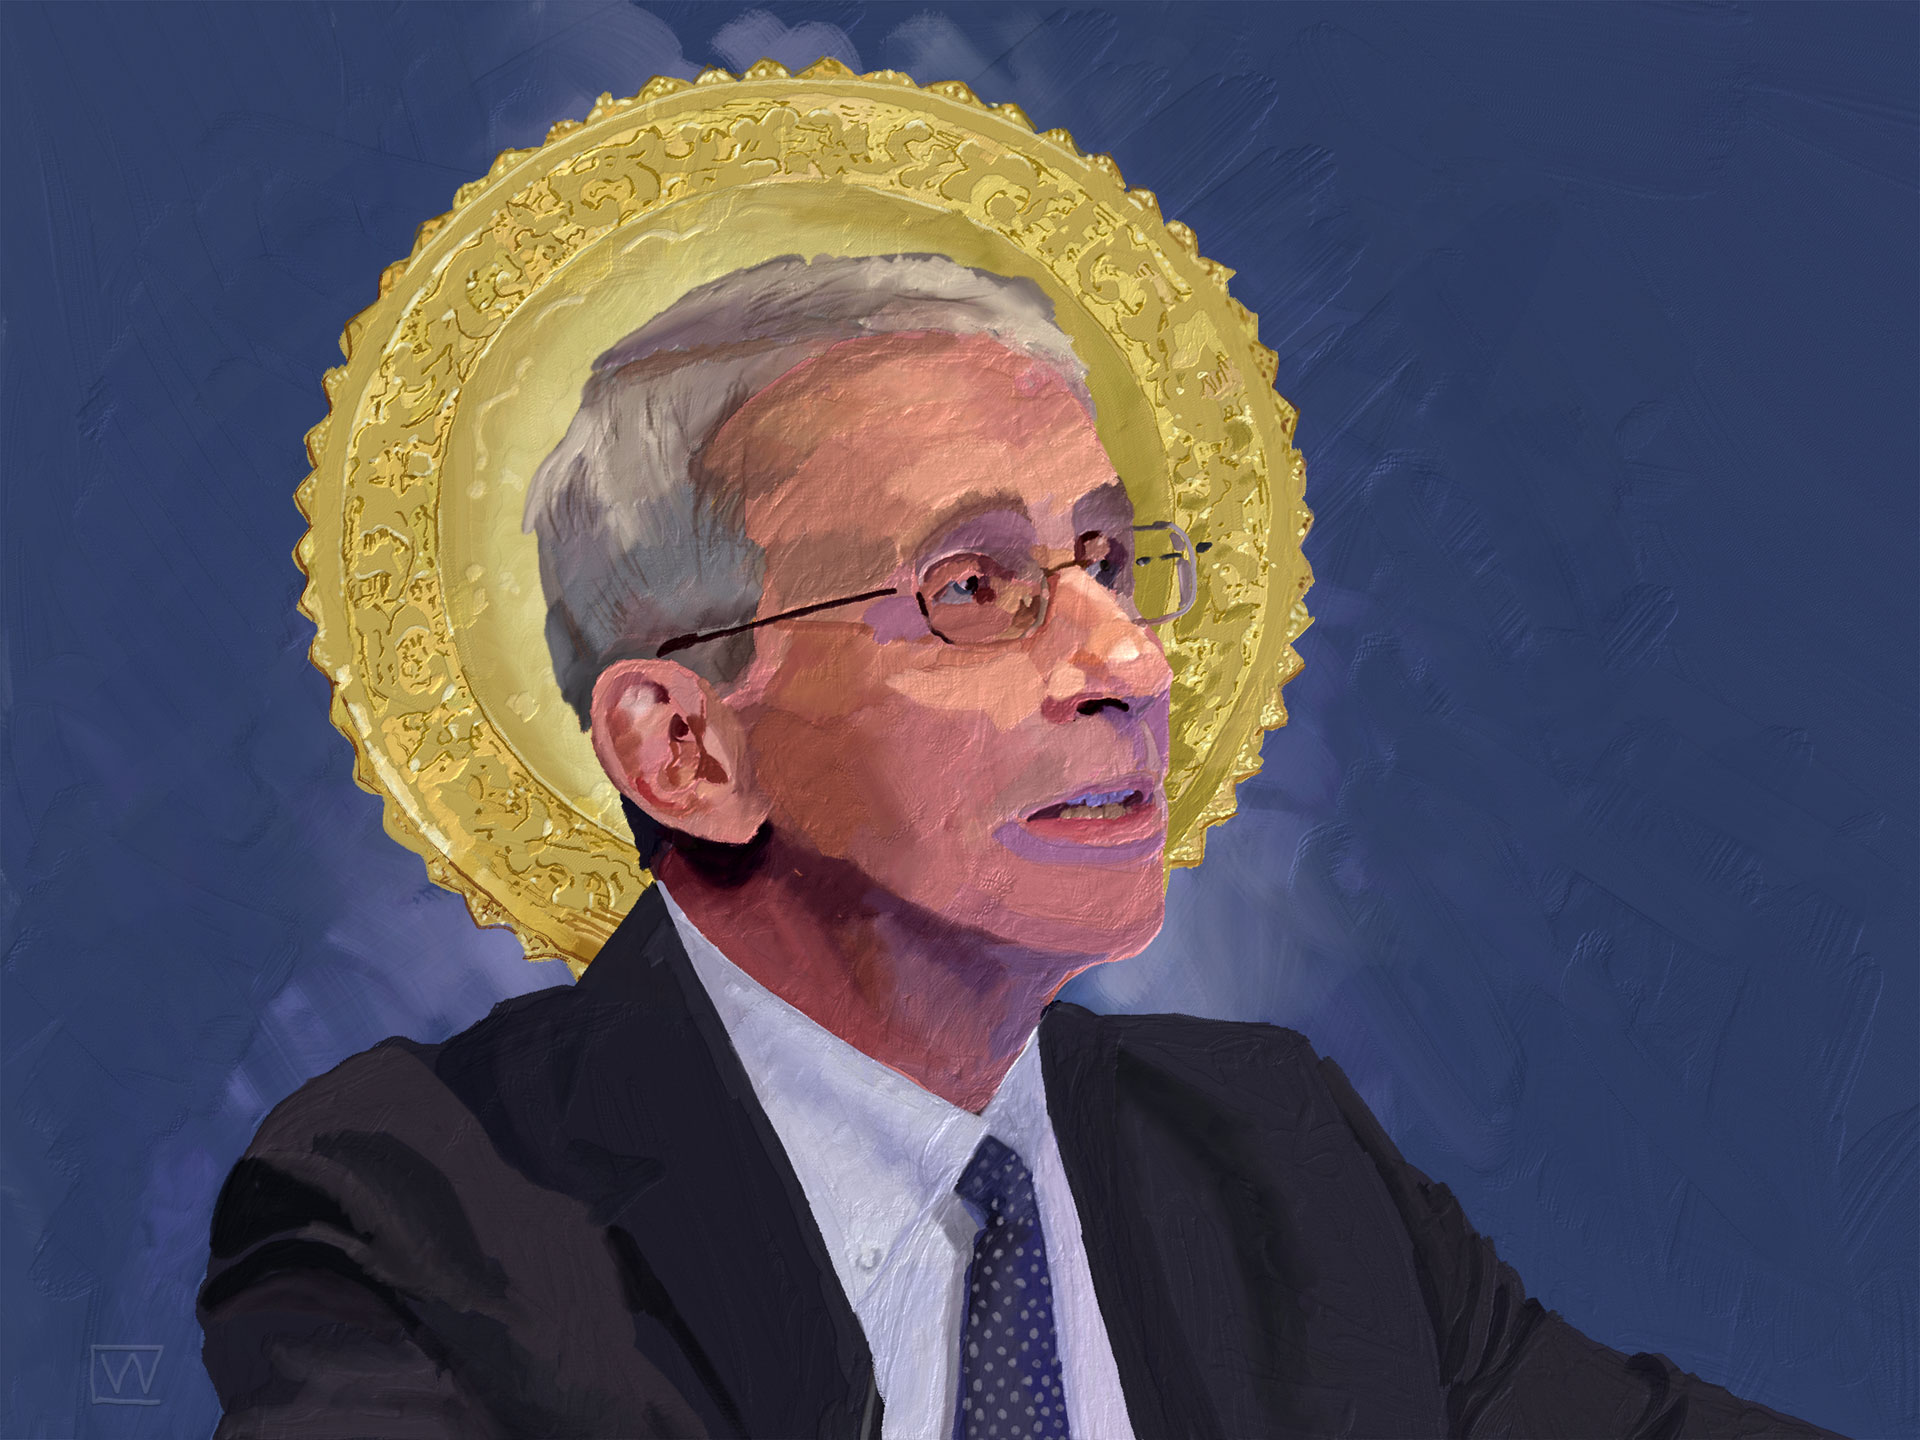 Dr. Fauci with gold halo